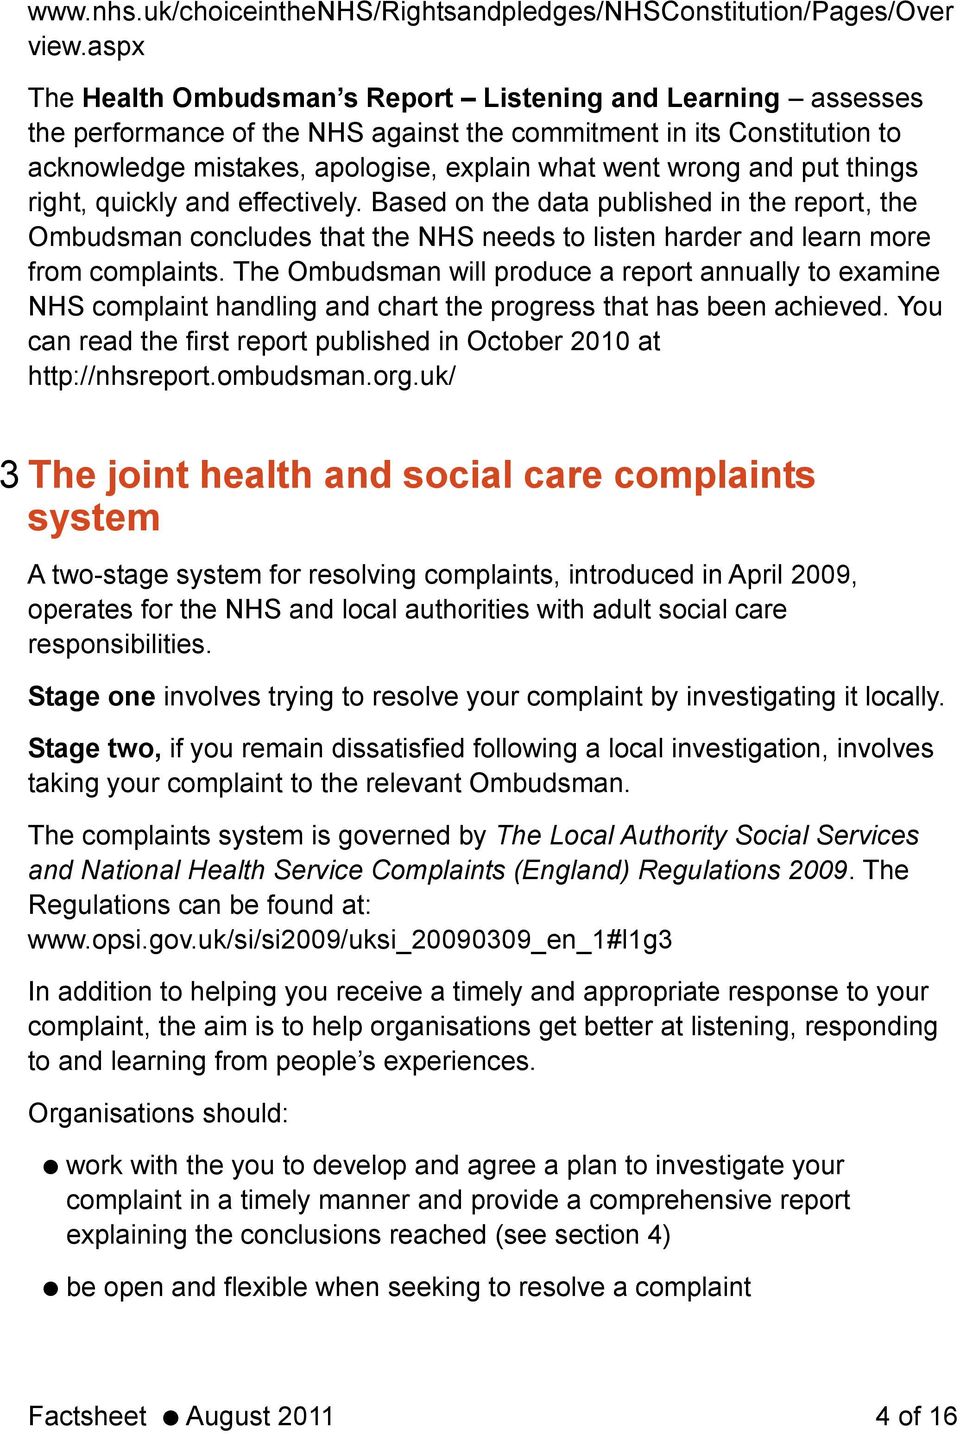 and put things right, quickly and effectively. Based on the data published in the report, the Ombudsman concludes that the NHS needs to listen harder and learn more from complaints.